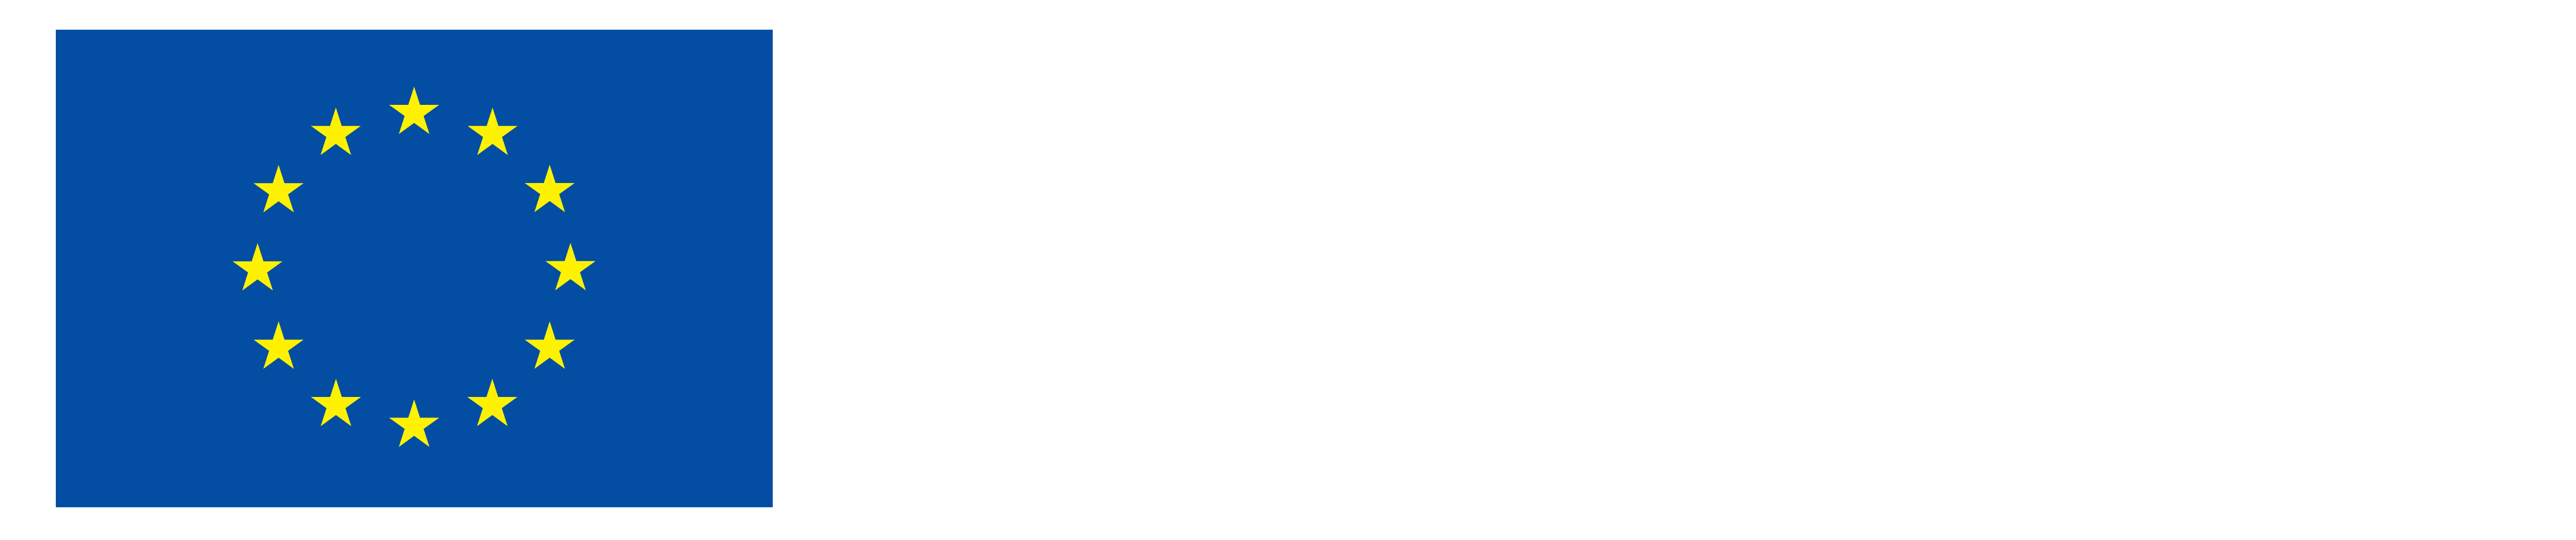 Funded by the European Union. Connecting Europe Facility.